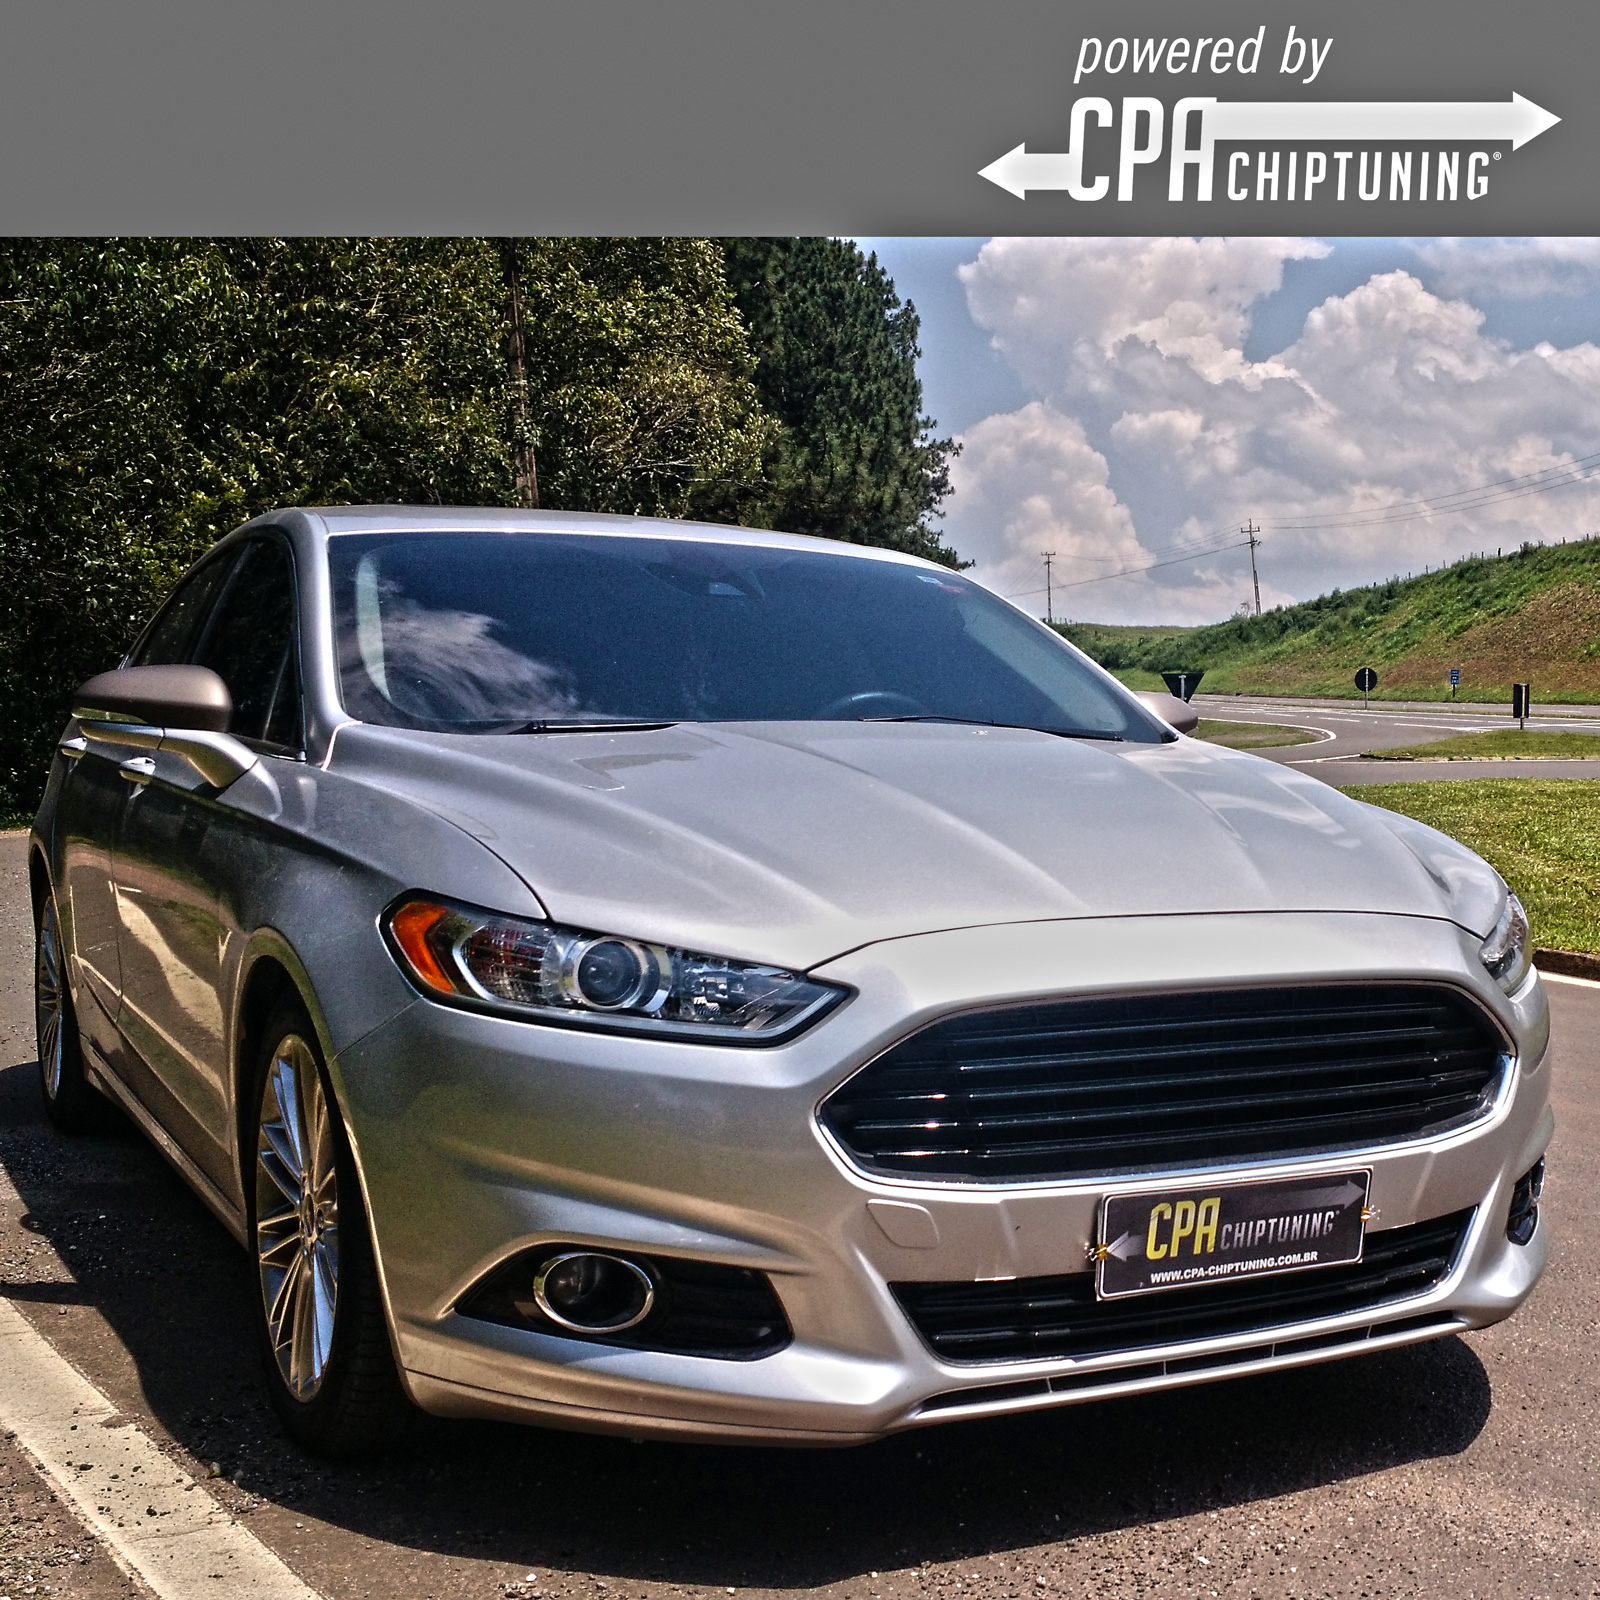 In test: Ford Fusion 2.0 EcoBoost